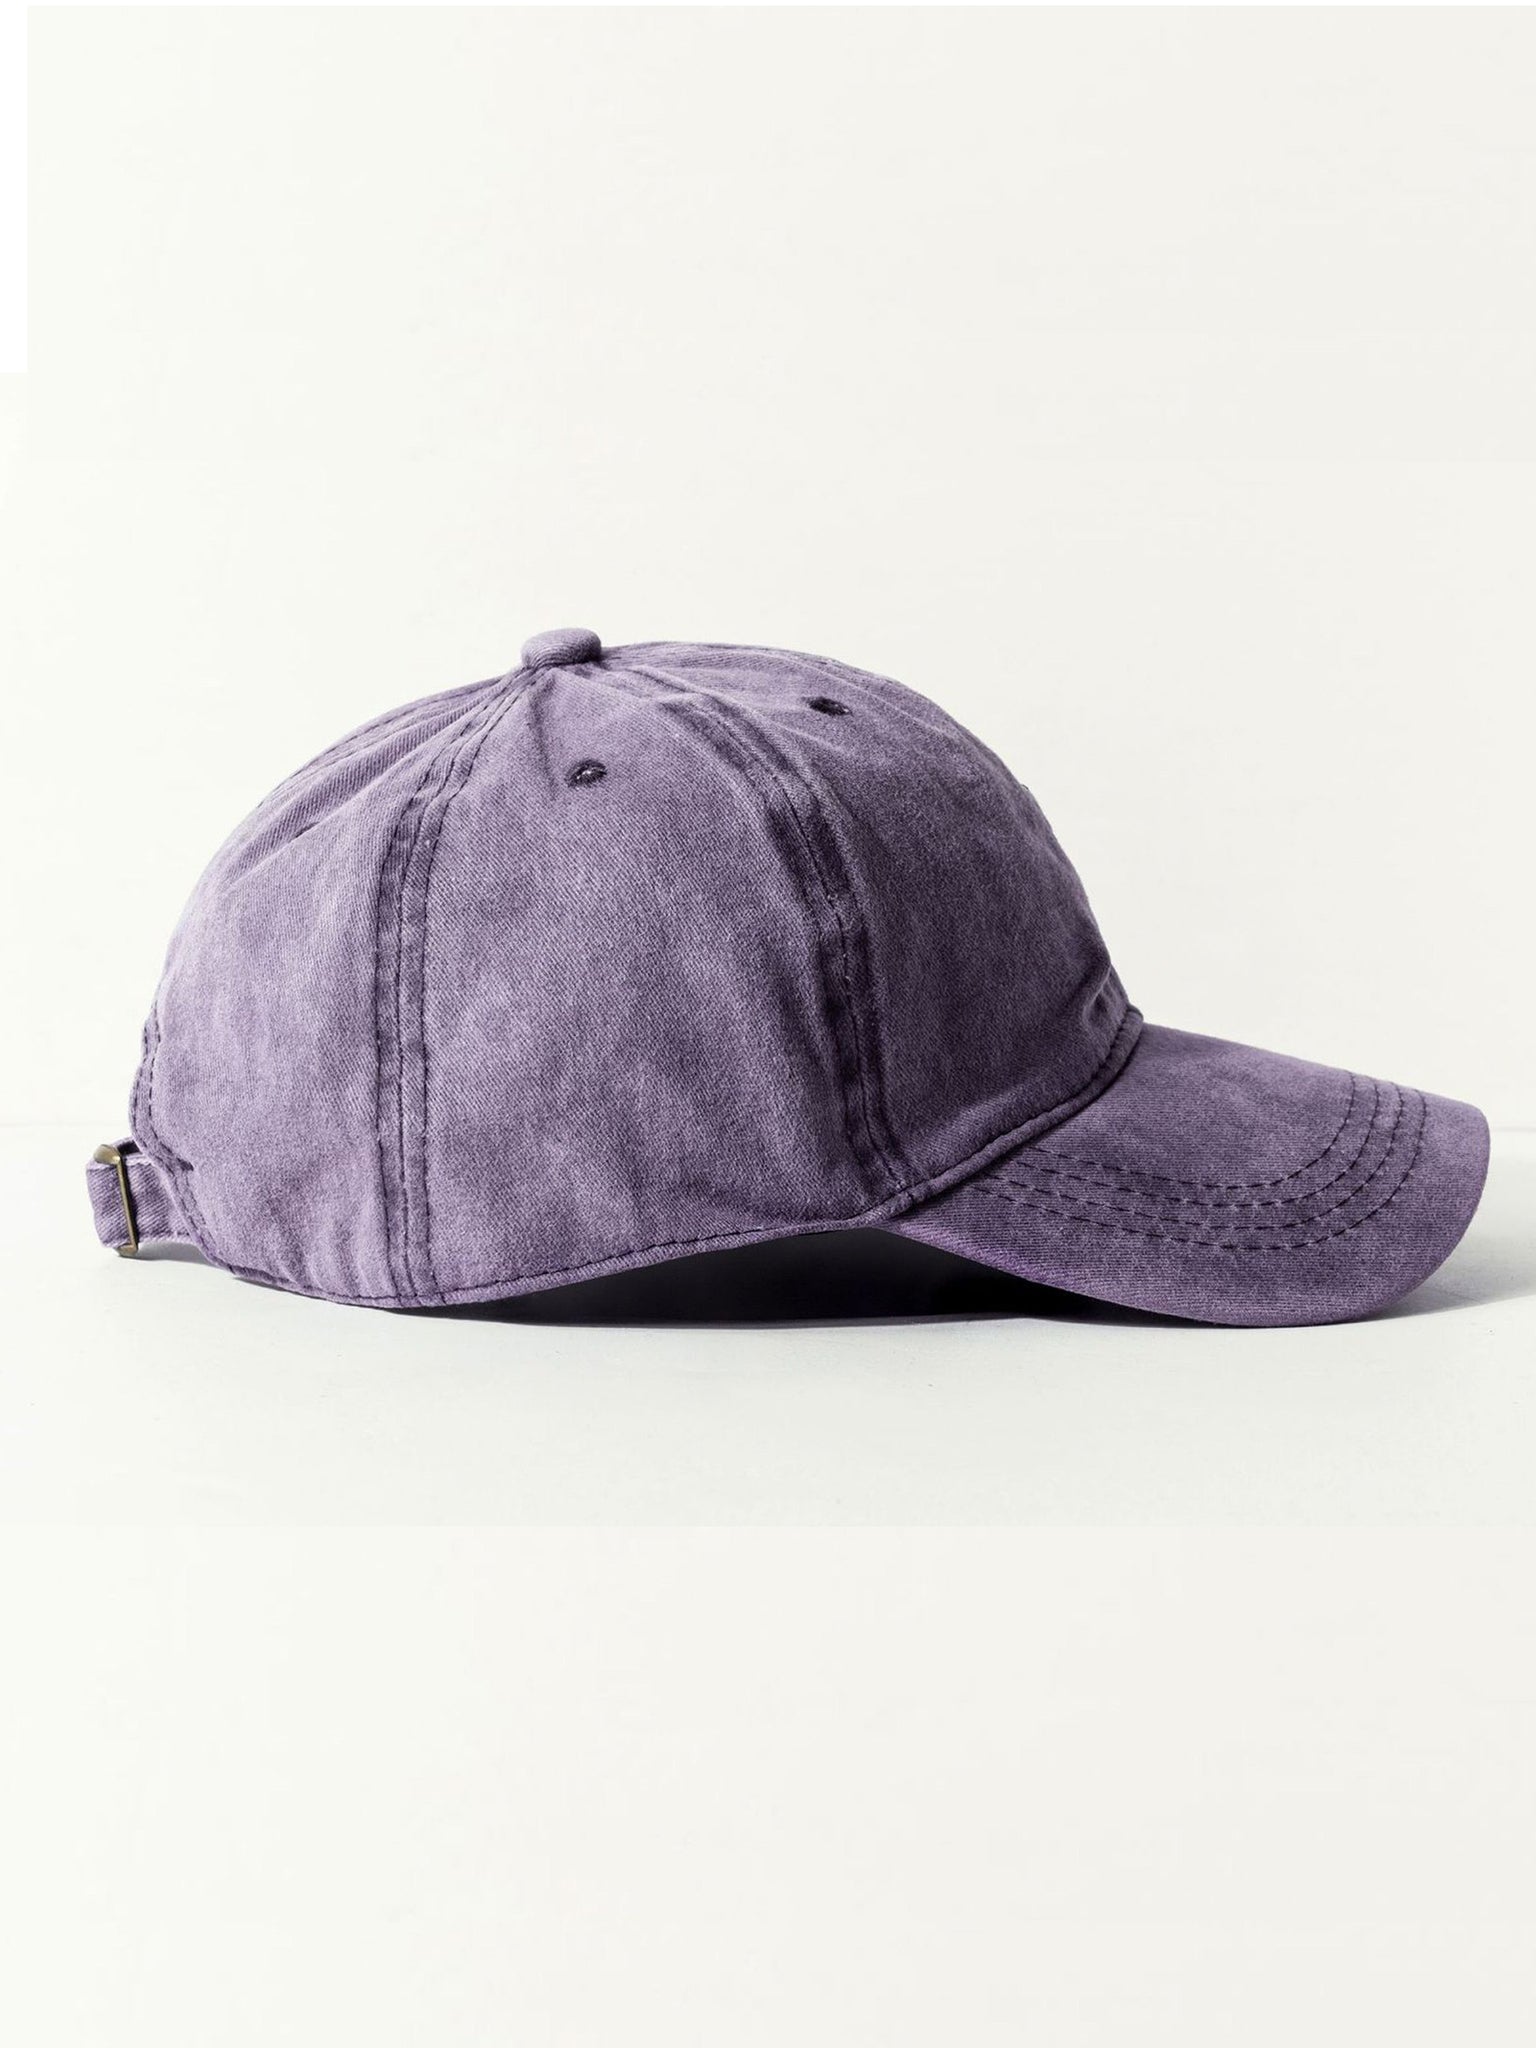 The Supermade Men Solid Color Heavy Washed Canvas Cap -1072 - SuperMade?